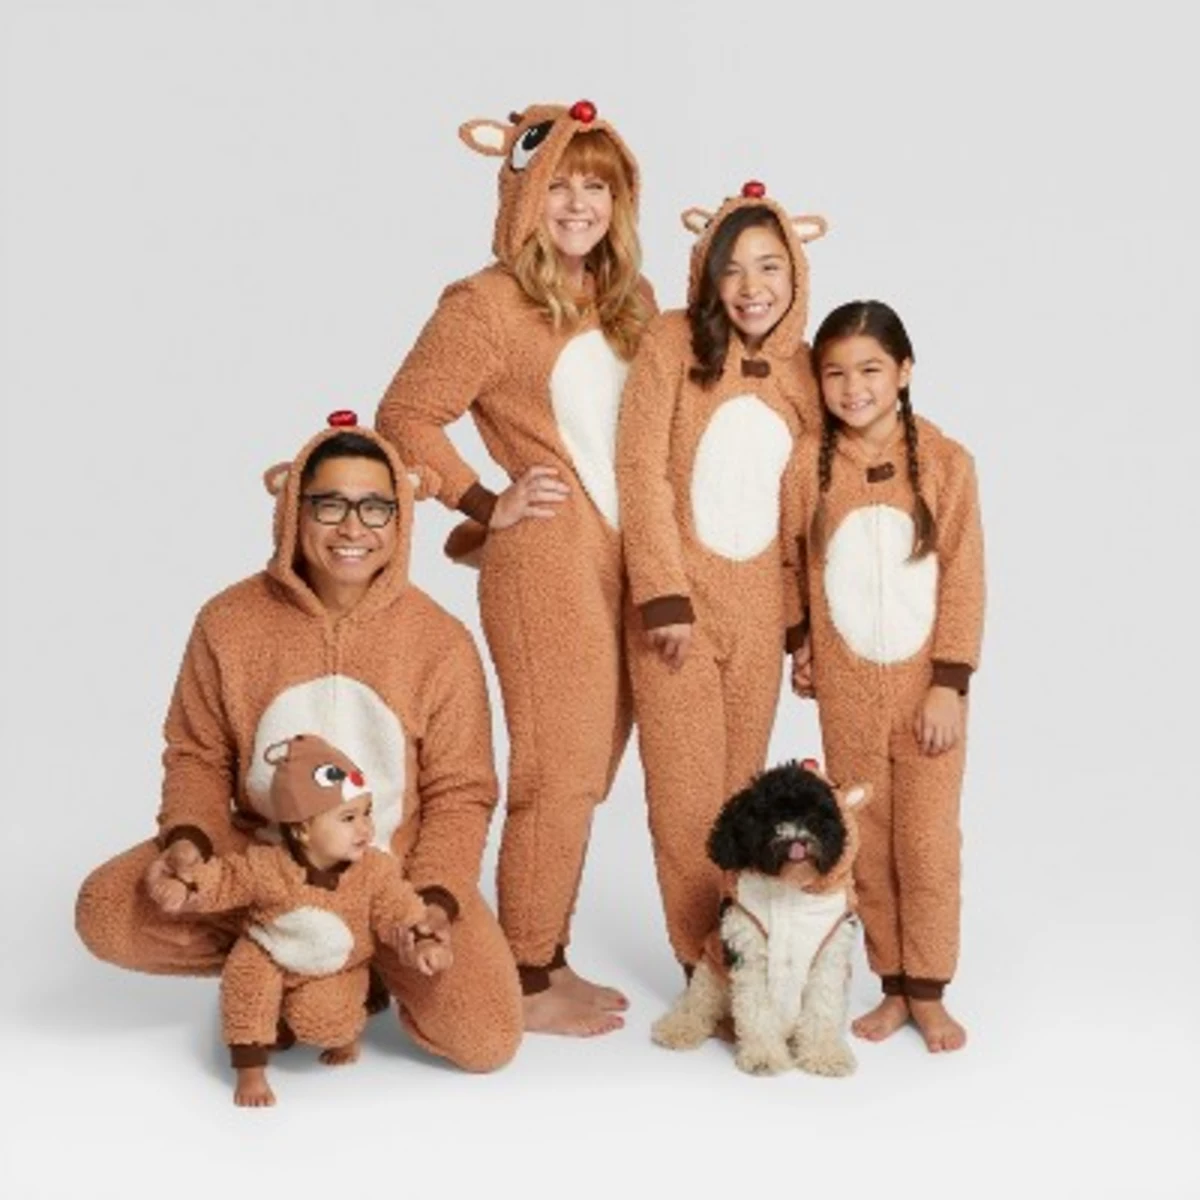 Matching Family Pajamas? Now, Include Your Pets in the Pics